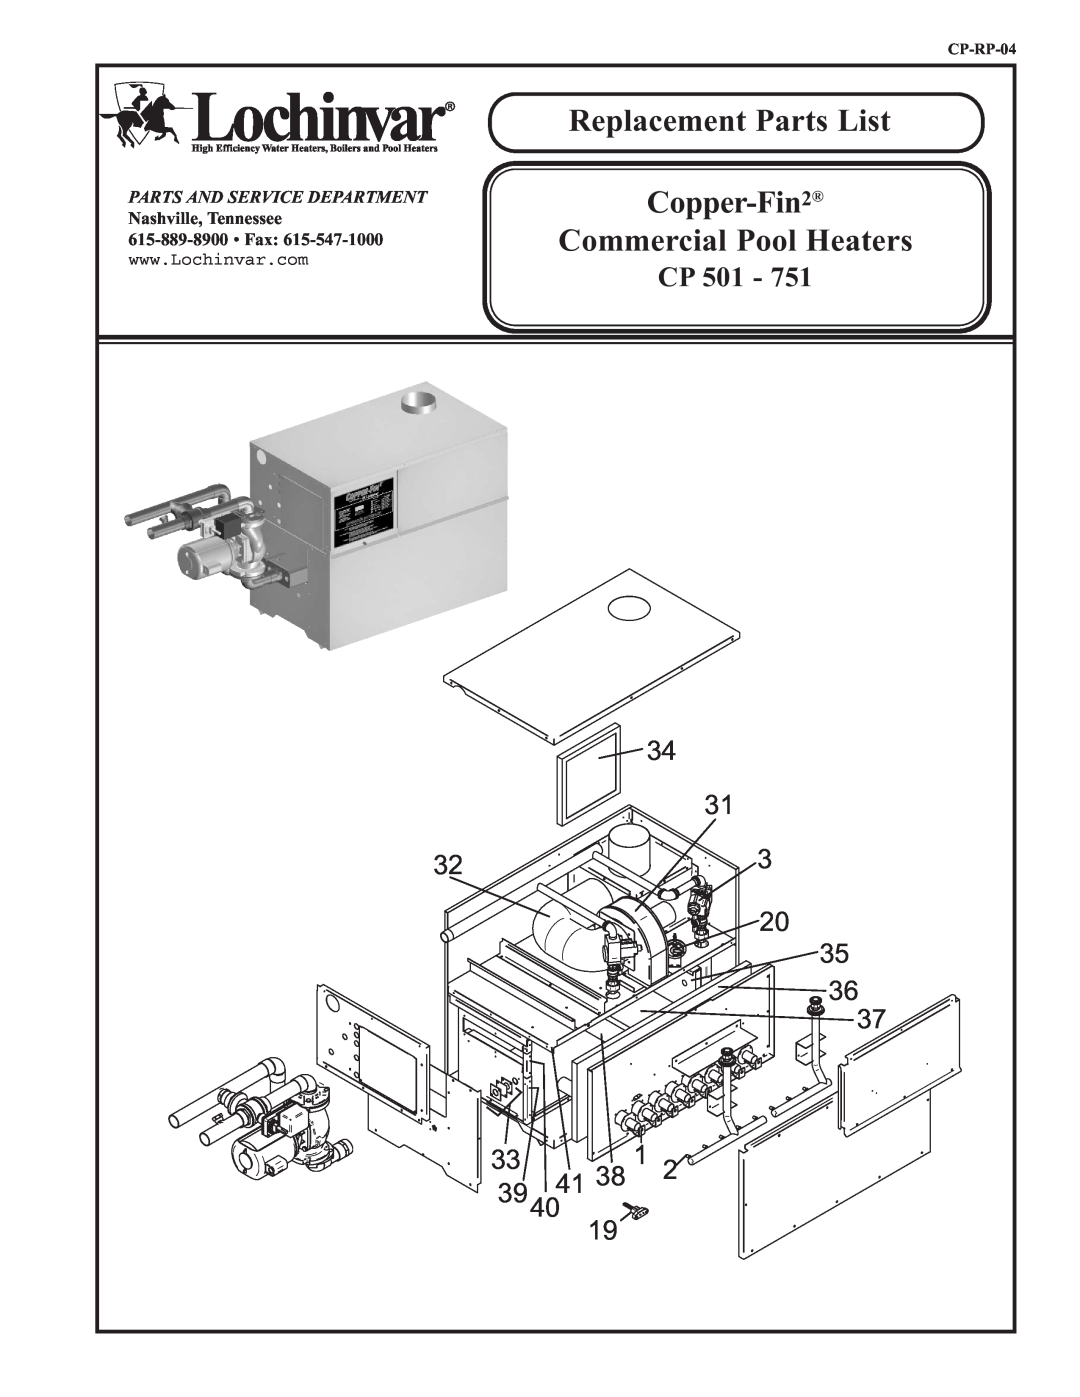 Lochinvar CP 501 - 751 manual Replacement Parts List, Copper-Fin2, Commercial Pool Heaters, Cp 